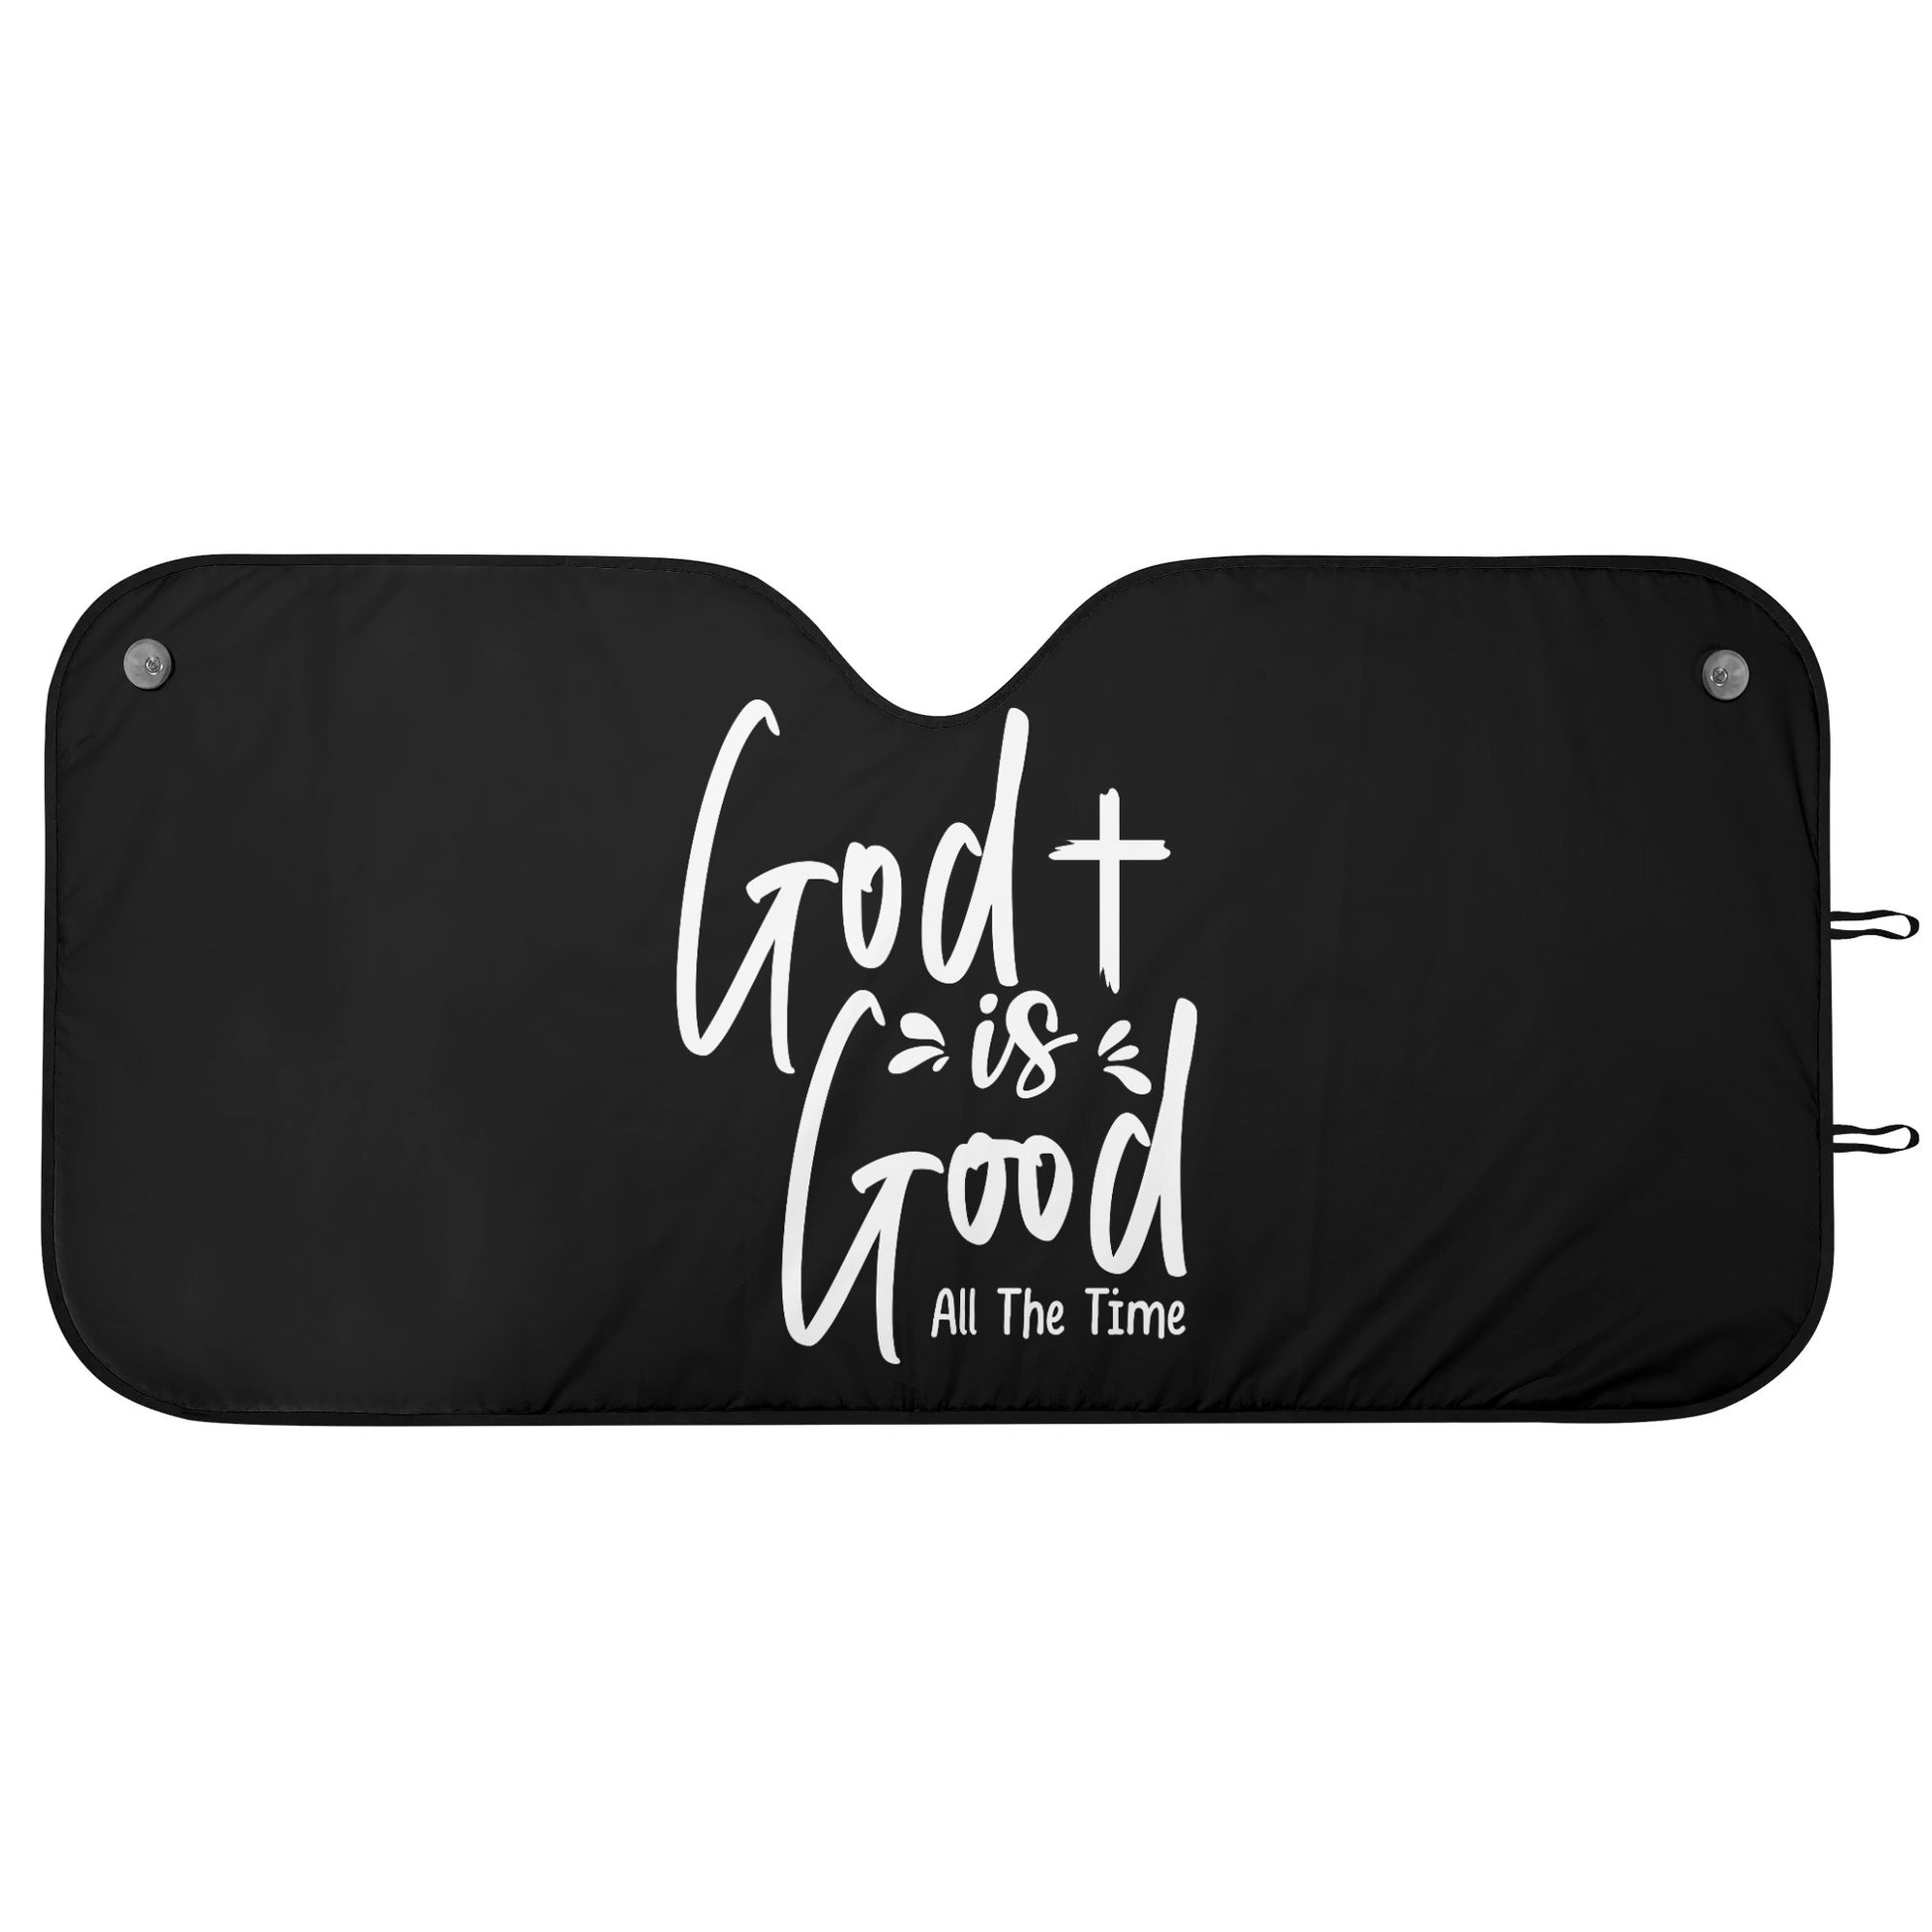 God Is Good All The Time Car Sunshade Christian Car Accessories popcustoms